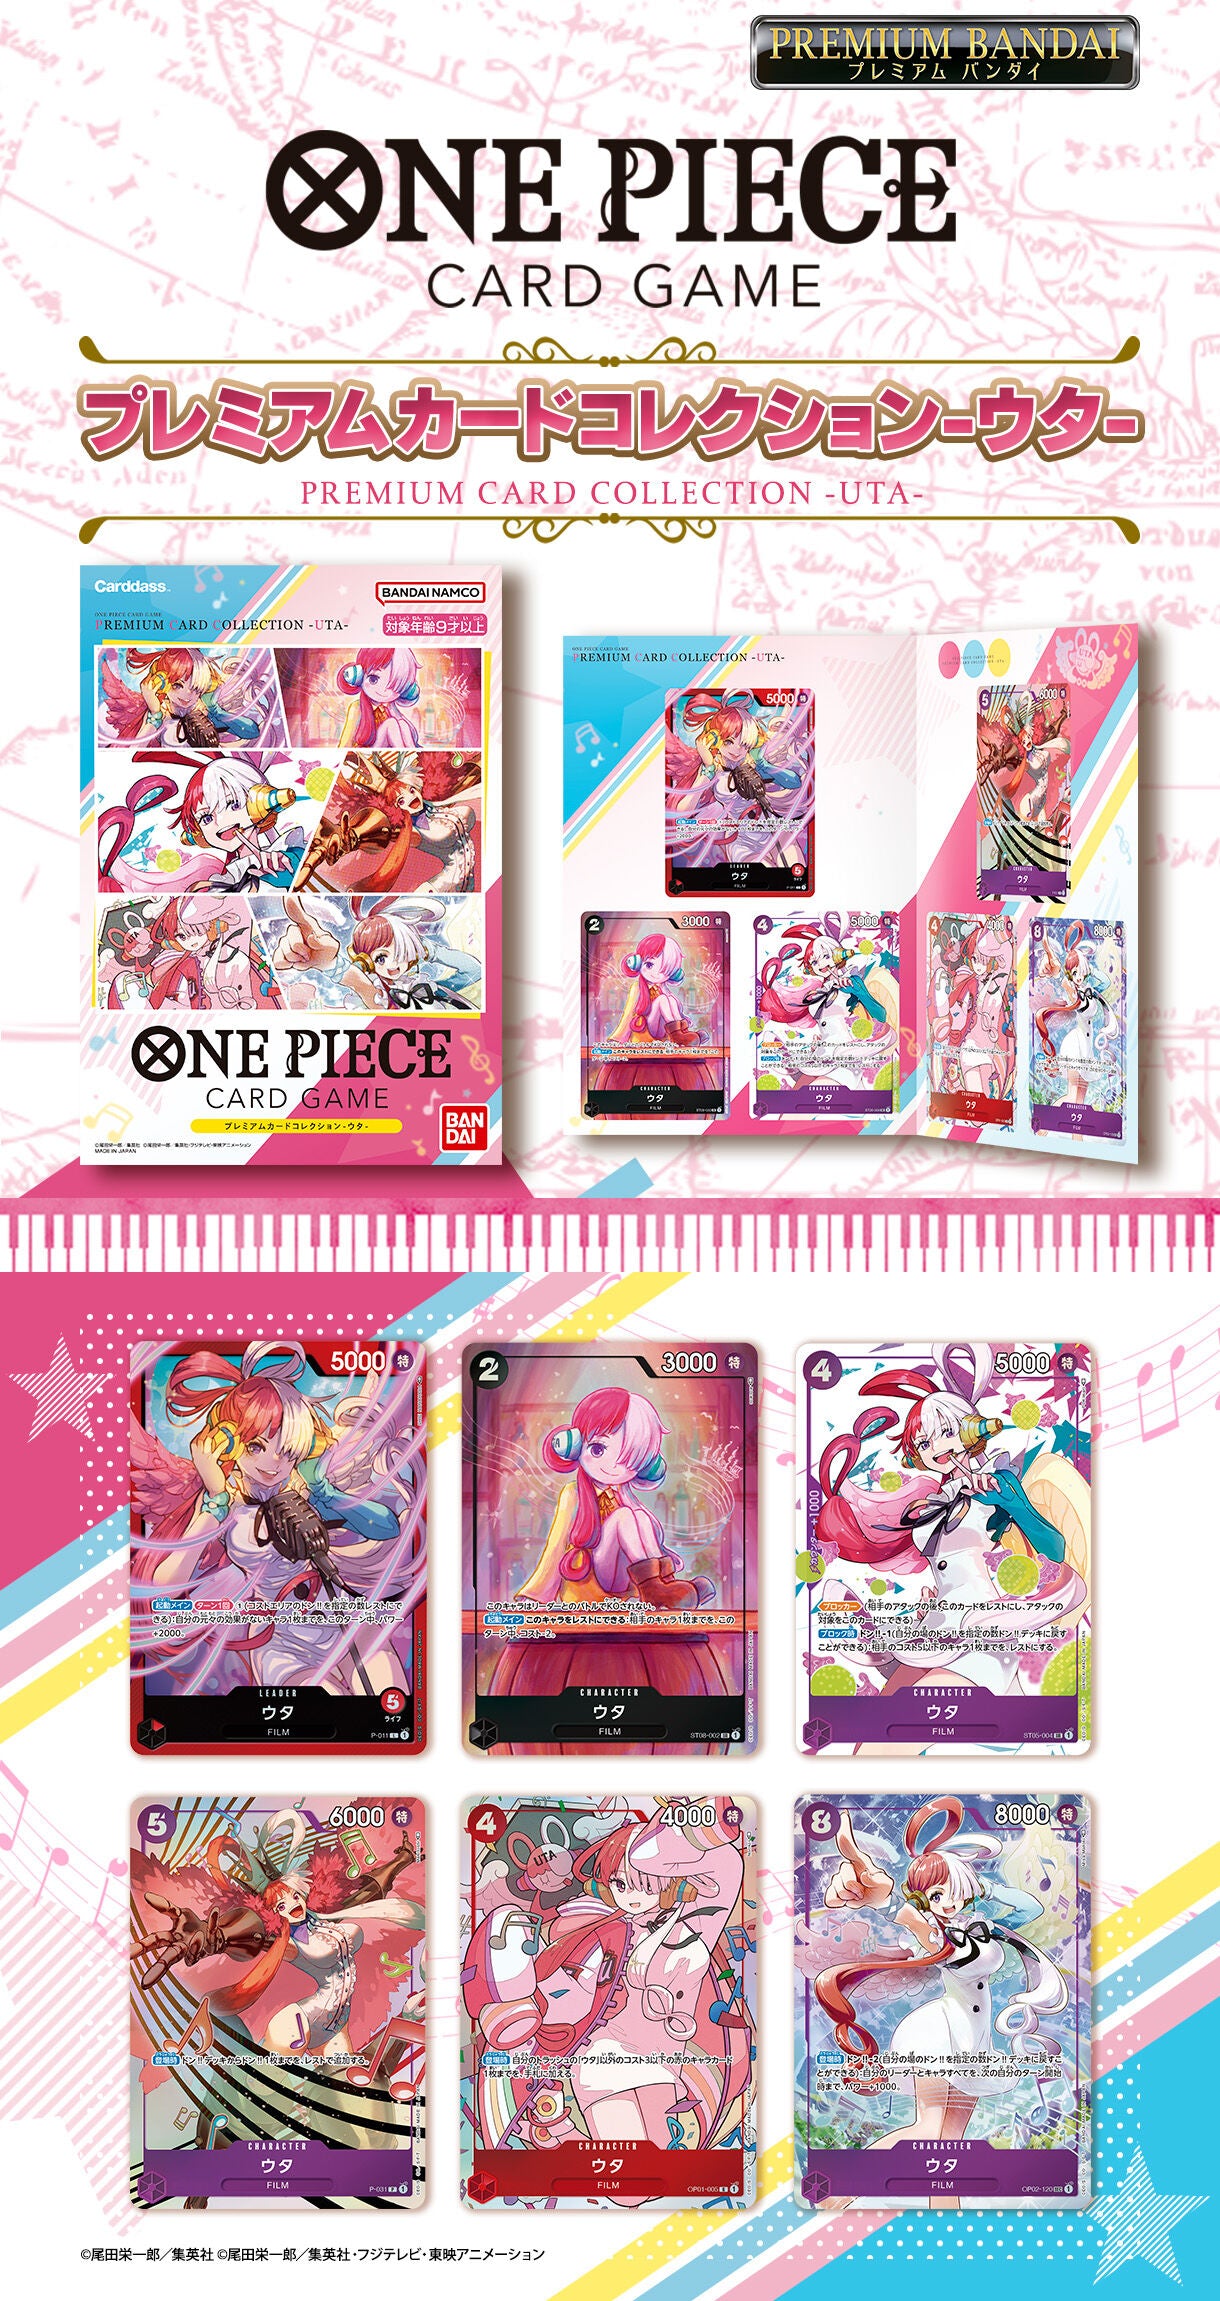 Carddass ONE PIECE CARD GAME PREMIUM CARD COLLECTION - UTA -